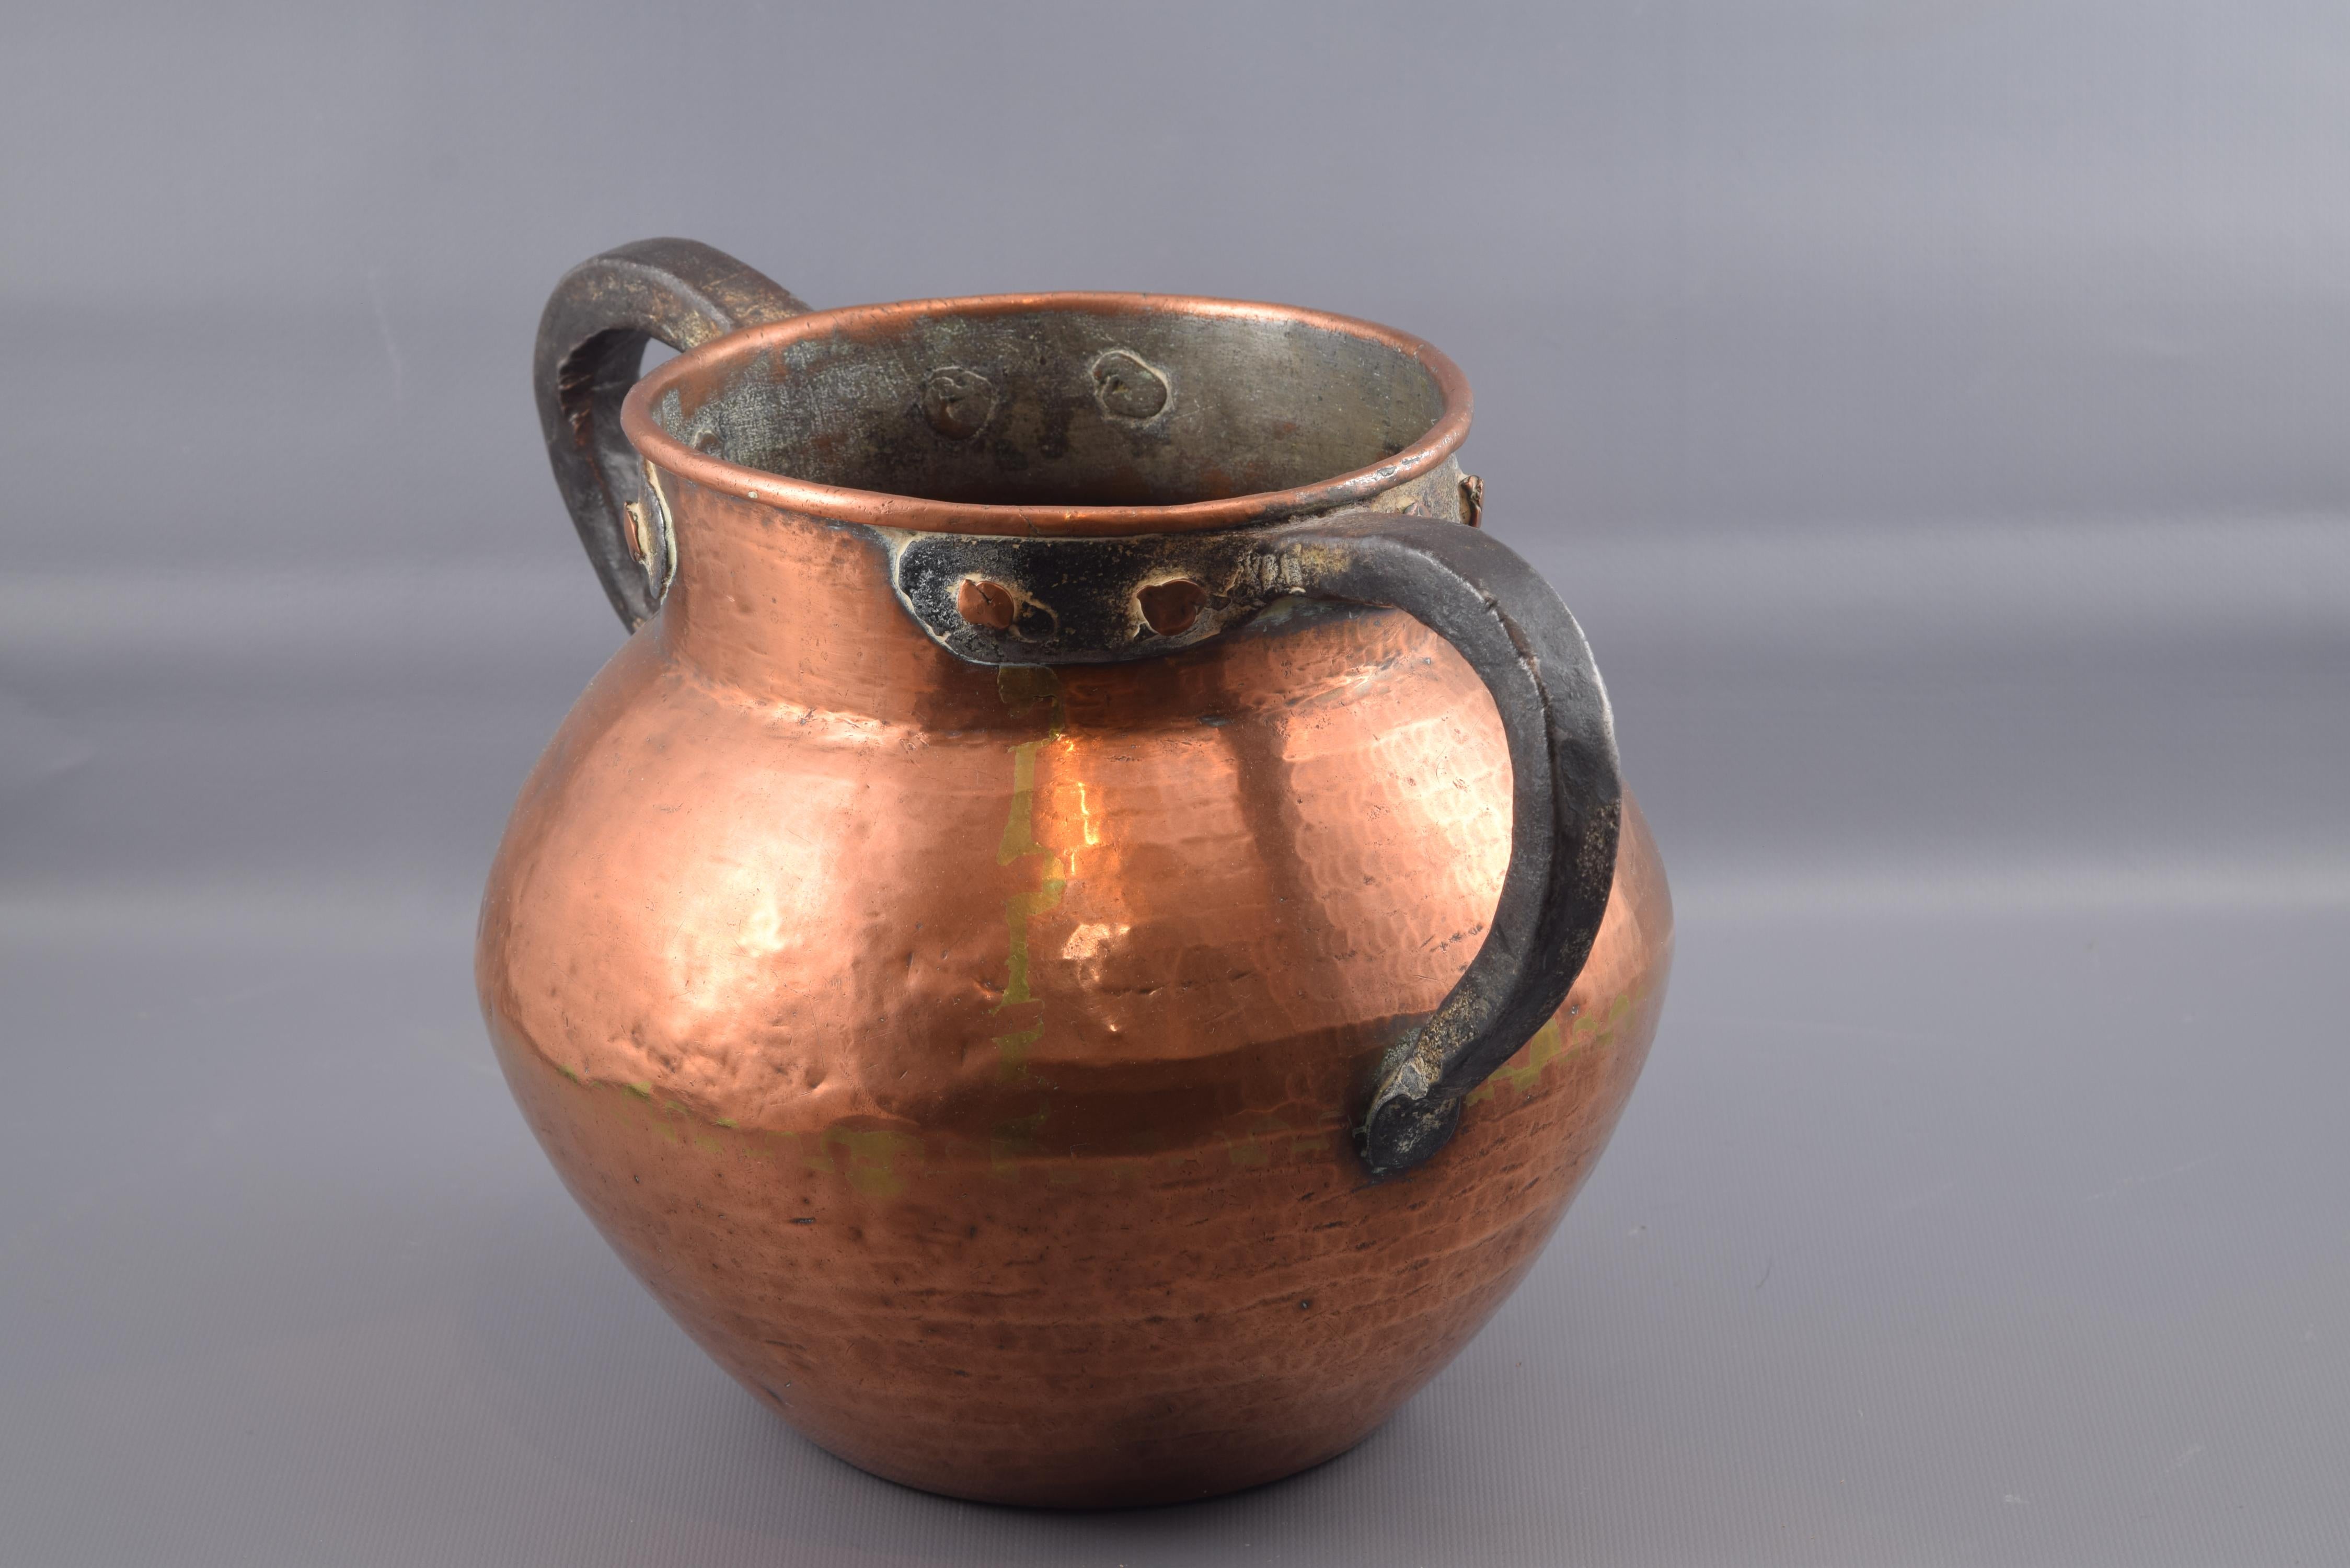 Container with handles. Copper, 18th century. 
A container with a circular body and a wide mouth that has two 